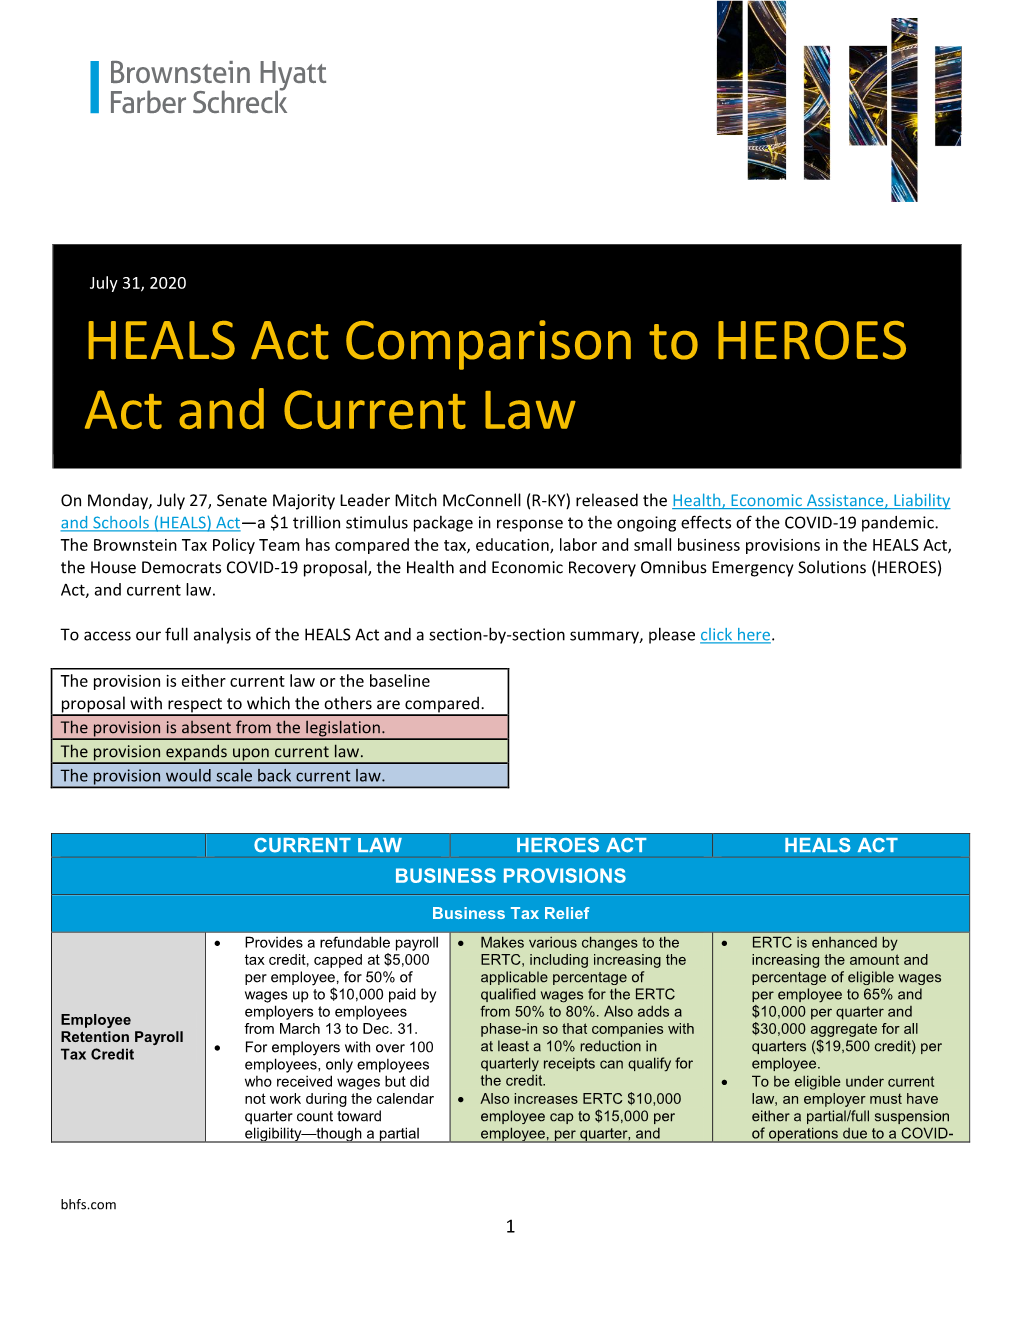 HEALS Act Comparison to HEROES Act and Current Law